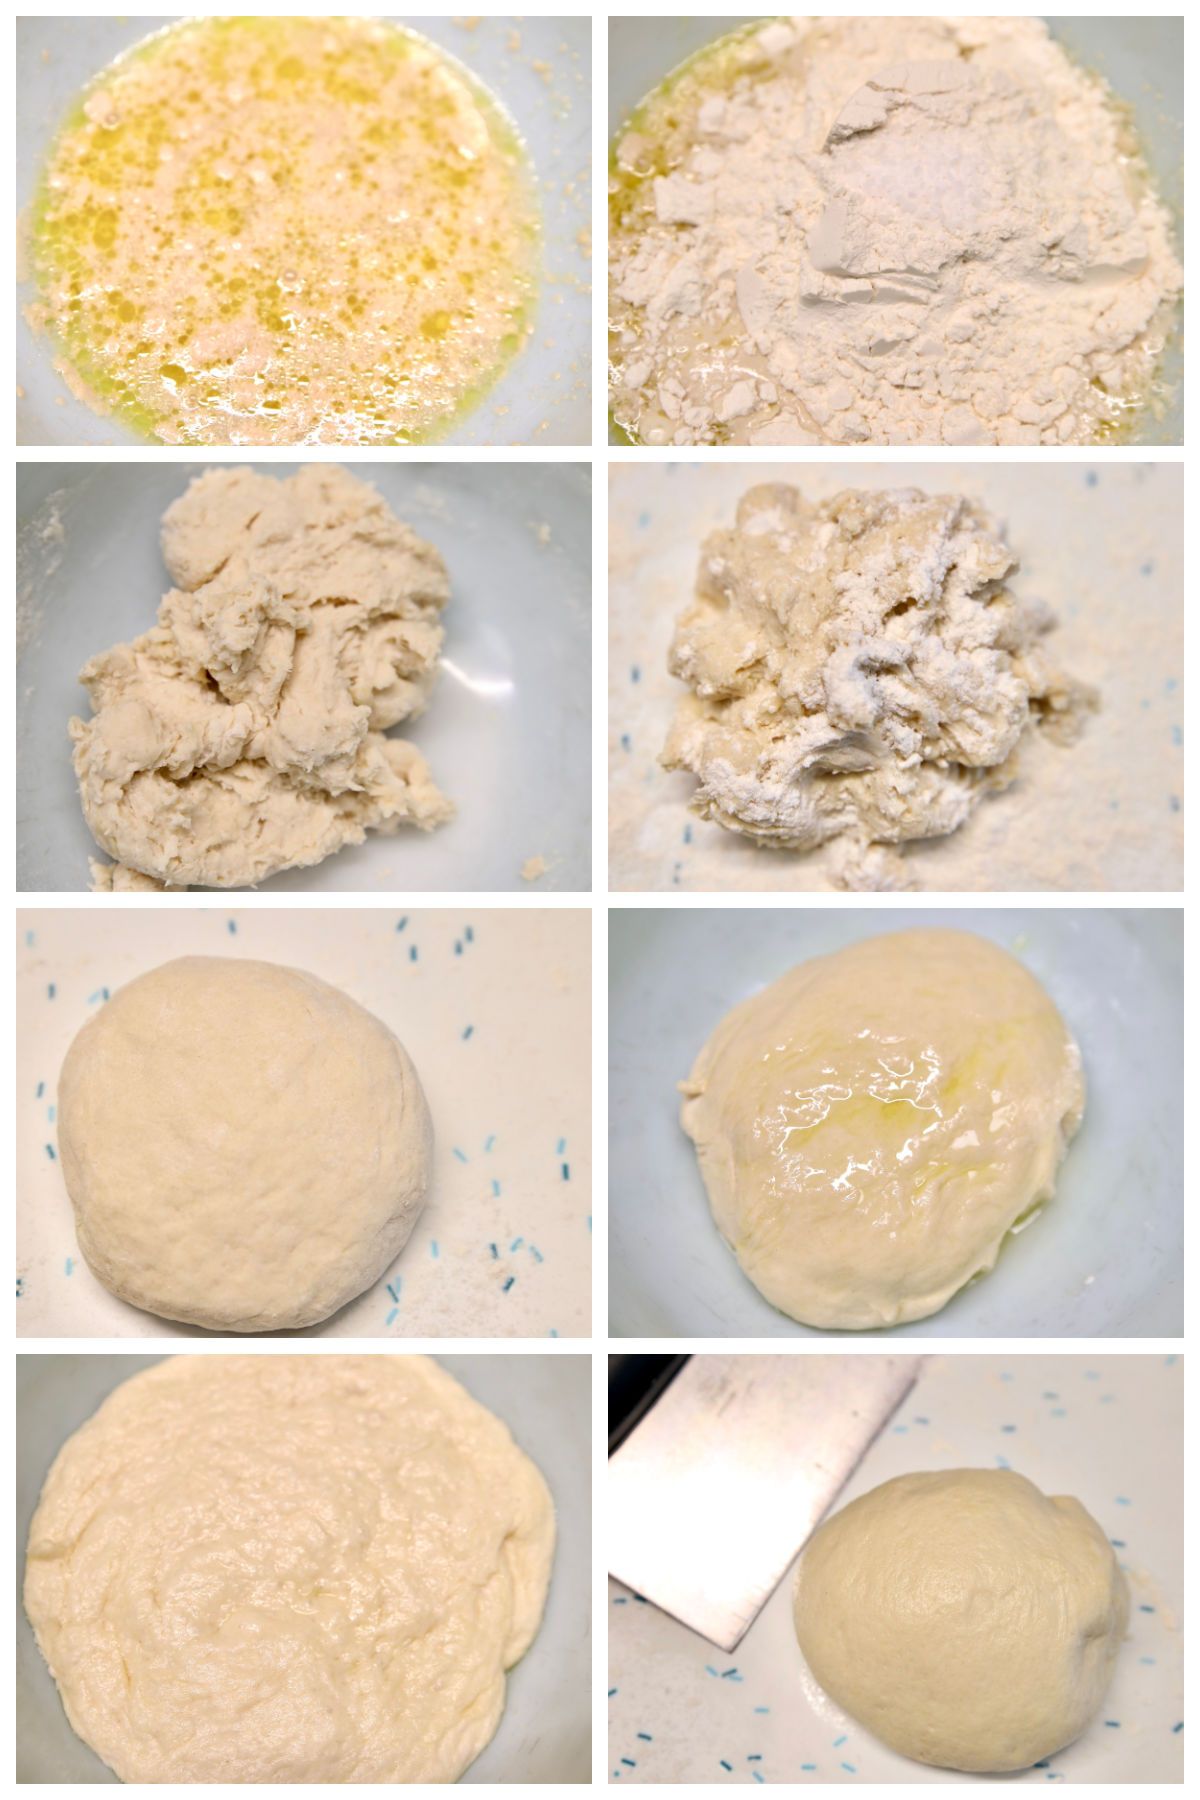 Collage making bread dough, kneading, rising.